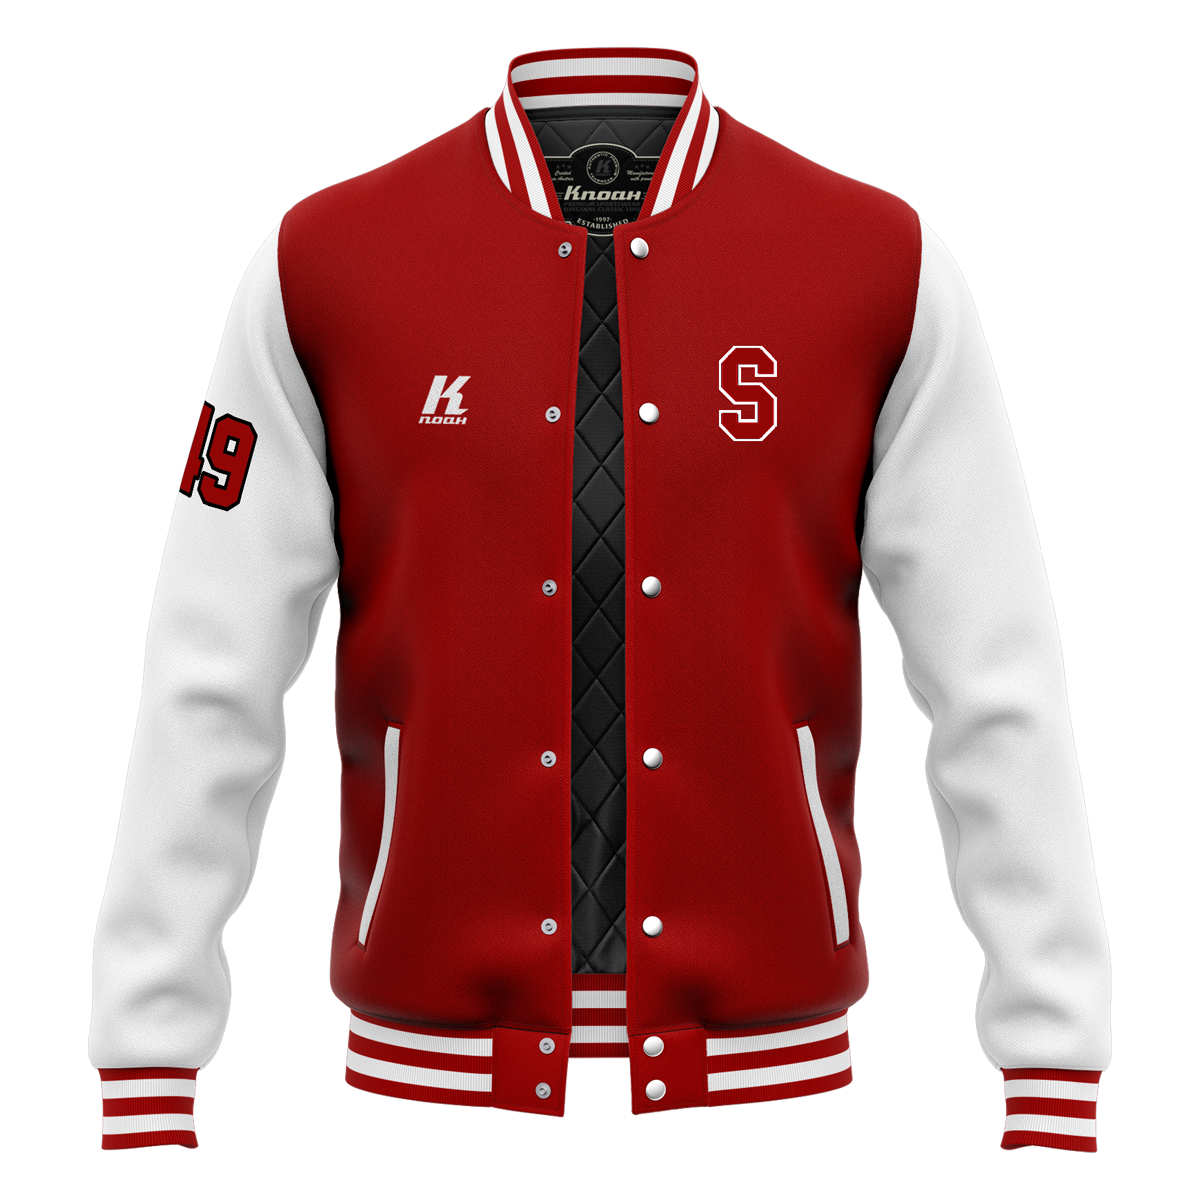 Scorpions Authentic Varsity Jacket with Playernumber/Initials